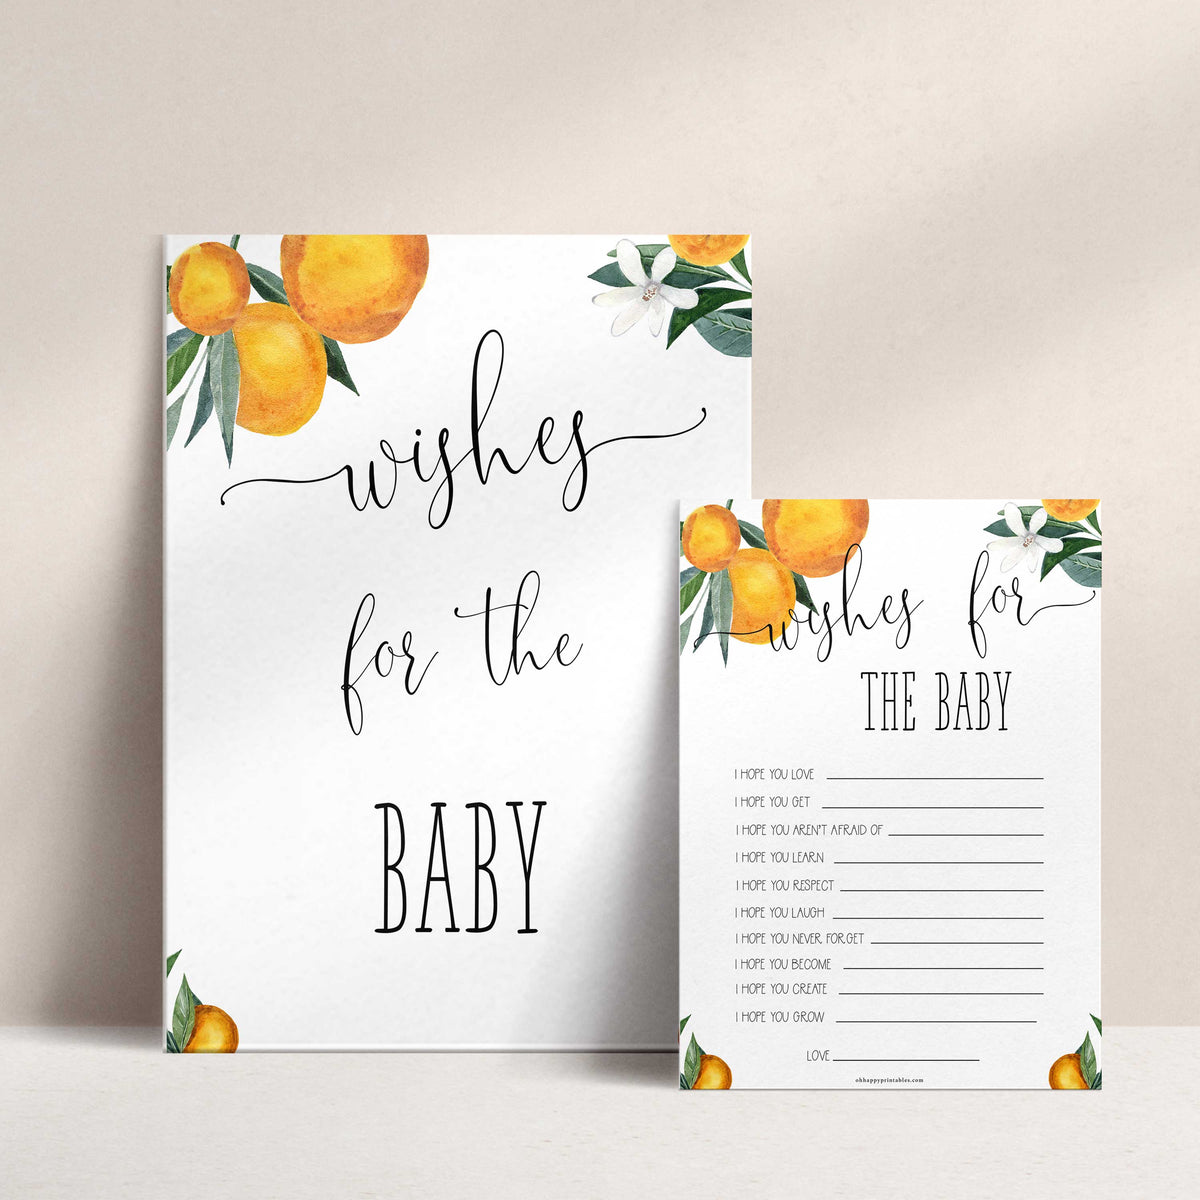 wishes for the baby keepsake, Printable baby shower games, little cutie baby games, baby shower games, fun baby shower ideas, top baby shower ideas, little cutie baby shower, baby shower games, fun little cutie baby shower ideas, citrus baby shower games, citrus baby shower, orange baby shower